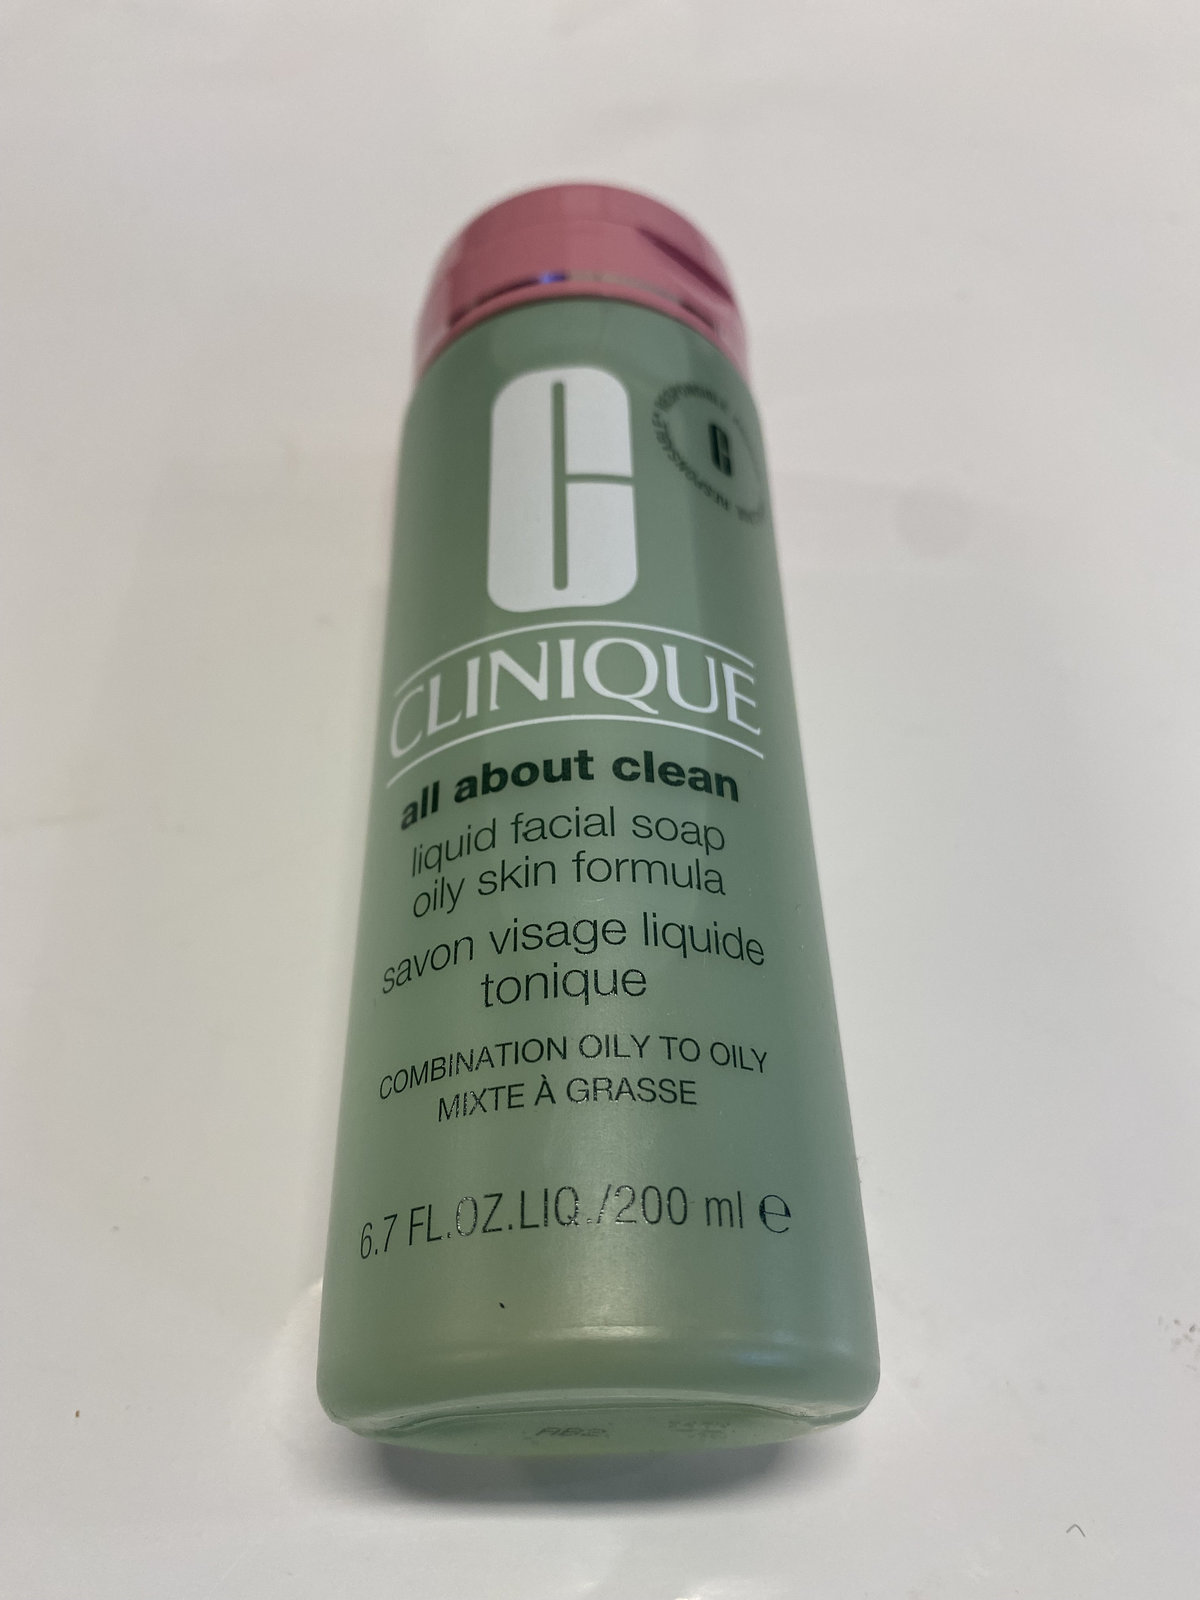 CLINIQUE all about clean liquid facial soap 200ml Combination oily to oily - $21.99